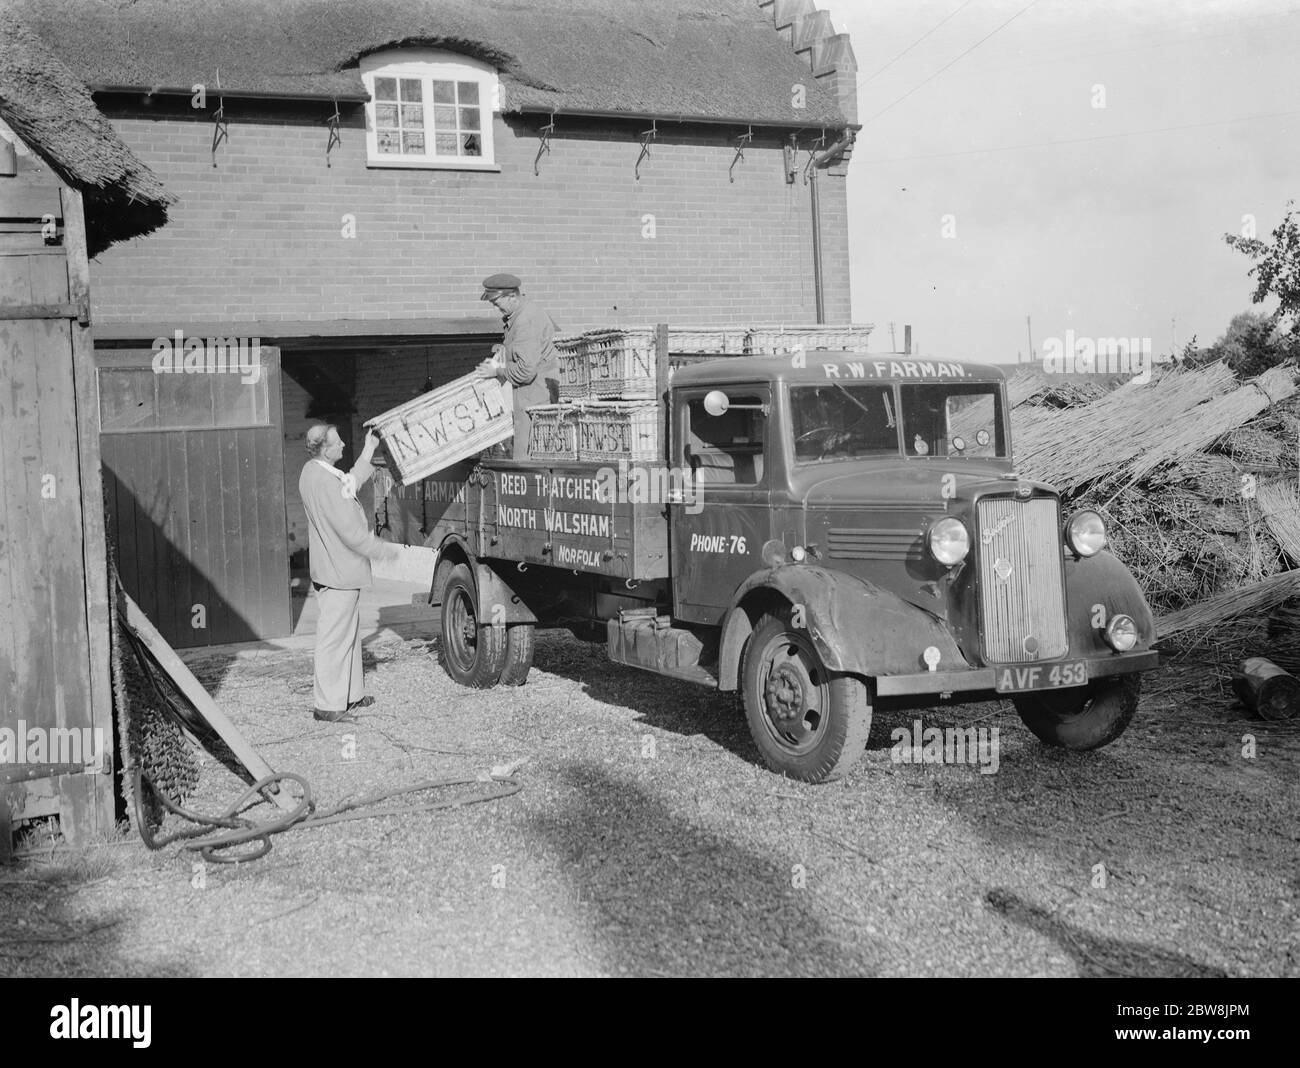 Bedford van , R W Farman . 19 August 1937 Reed Thatching in Norfolk. Mr R. W. Farman, of North Walsham, The last working representative of an old Norfolk reed thatching family. Stock Photo